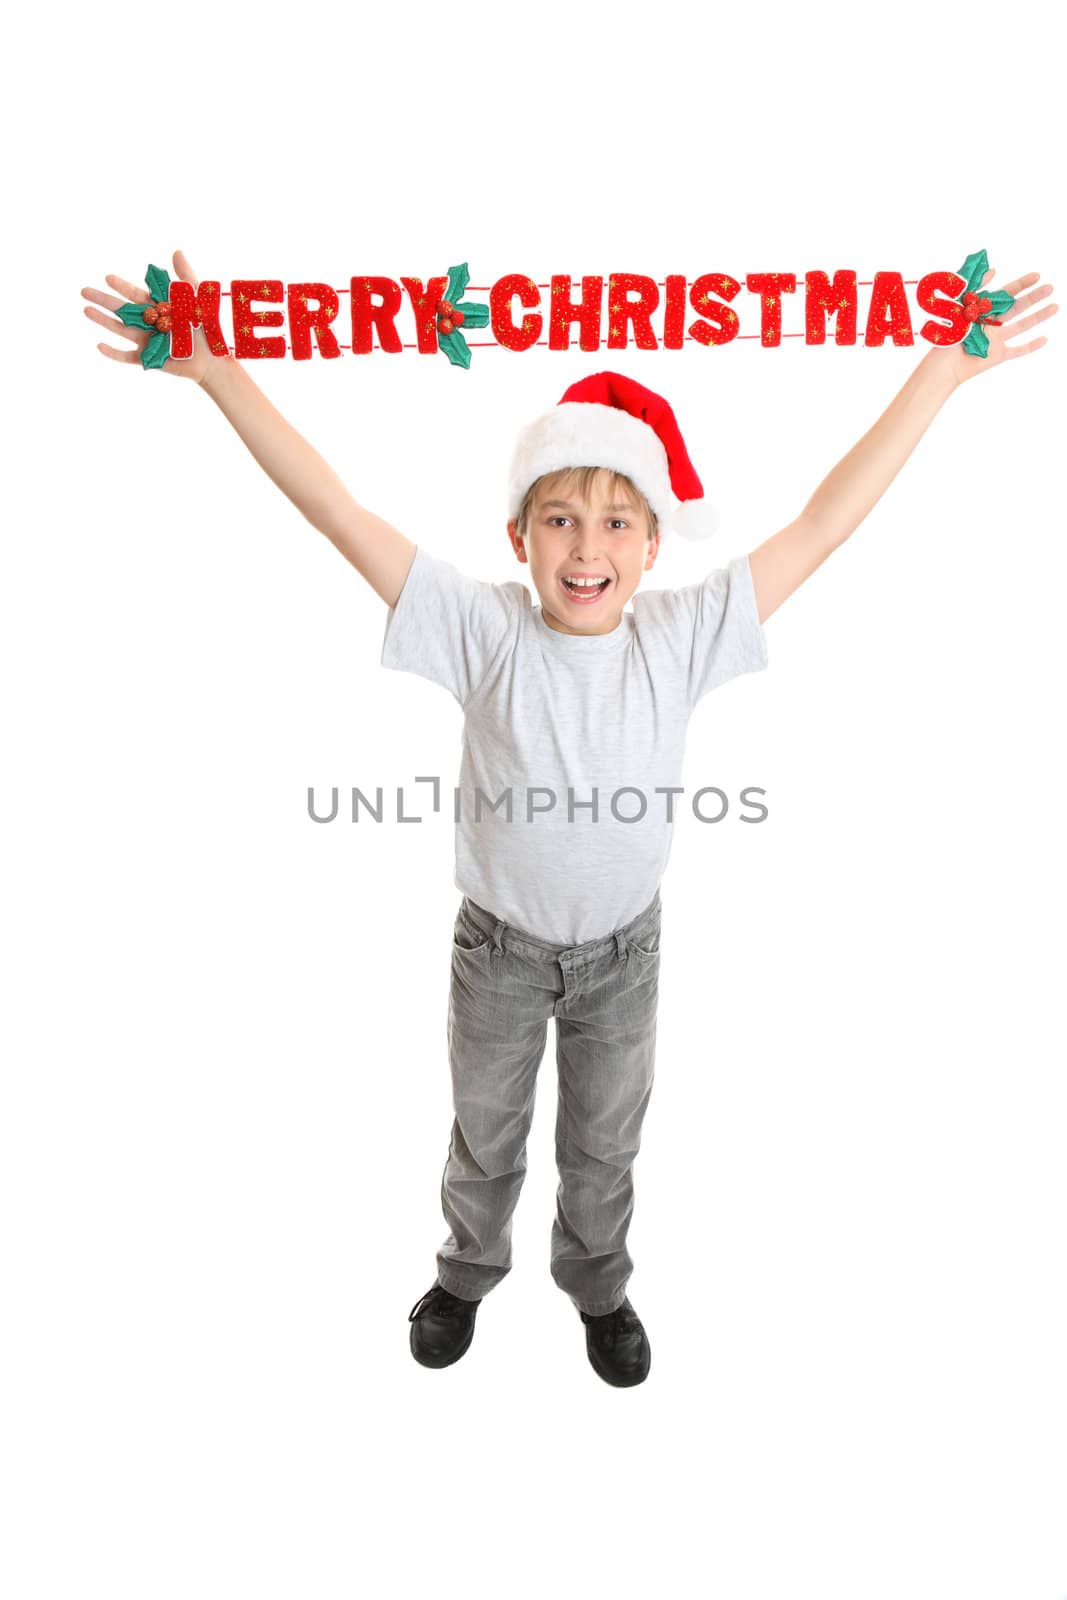 A joyful full length child holding up a Merry Christmas decoration above his head on a white background.